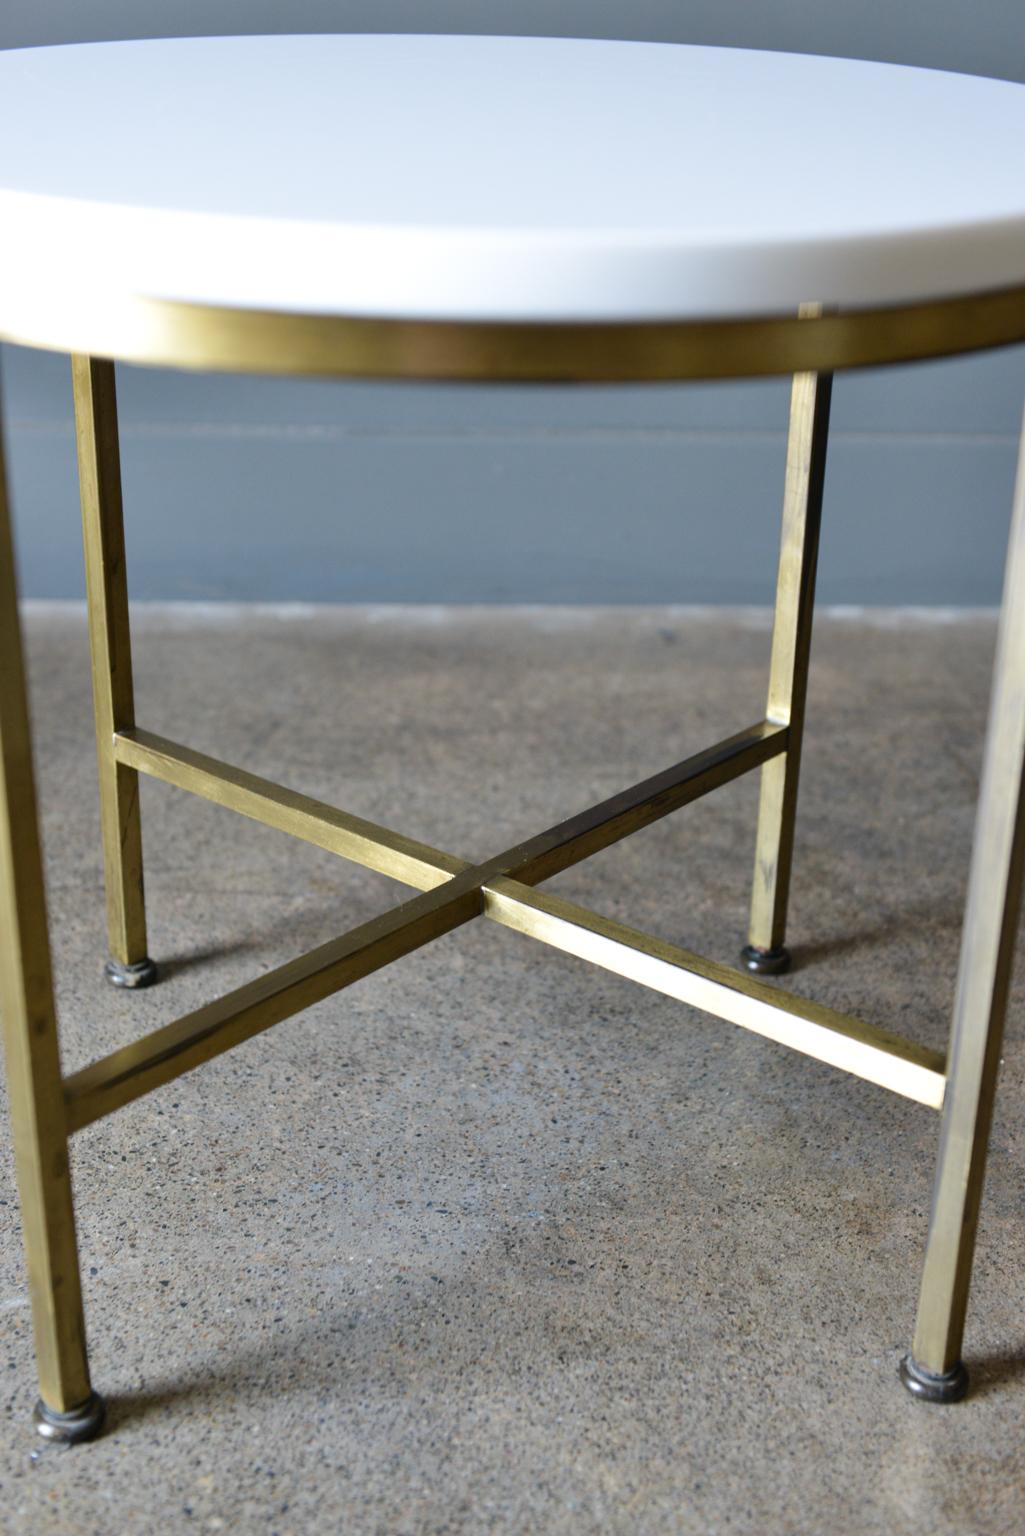 Mid-20th Century Round Brass and Vitrolite Side Table by Paul McCobb, circa 1959